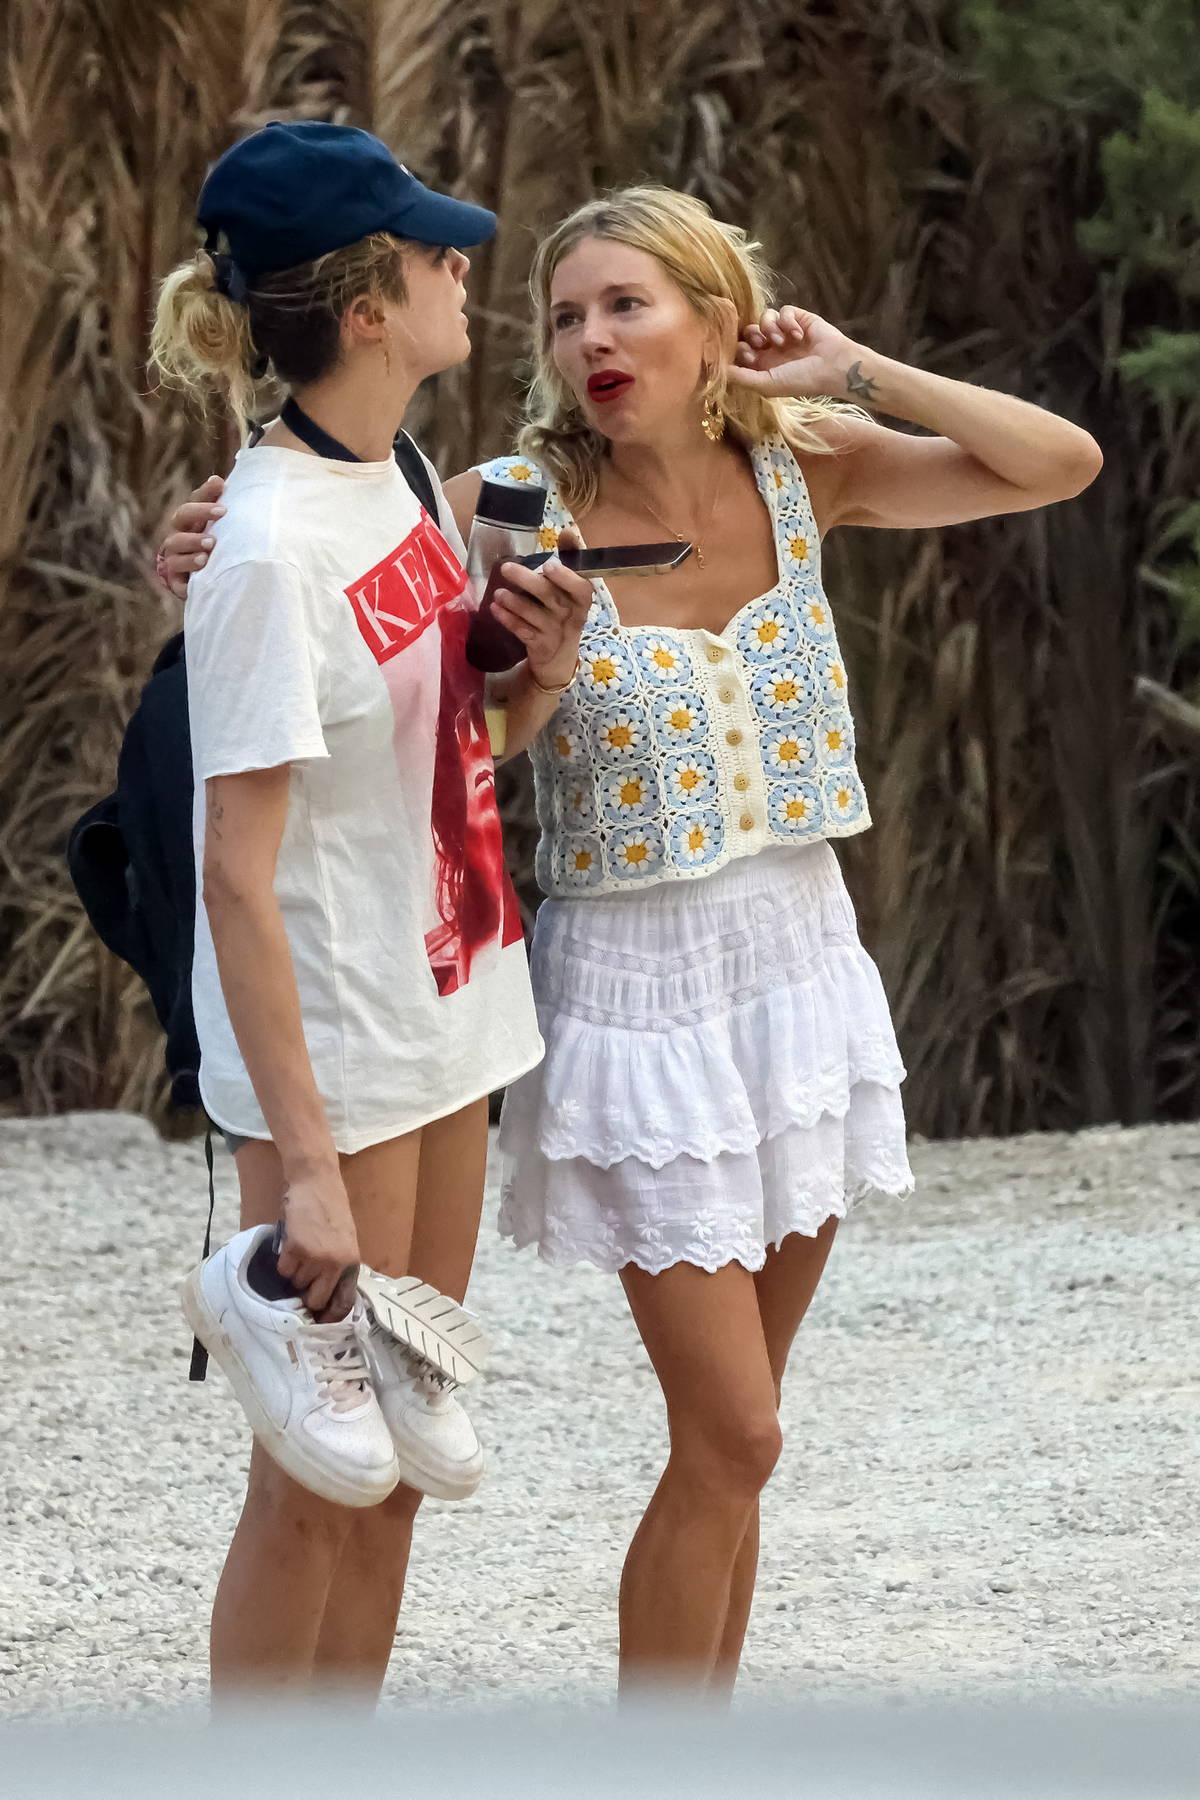 Cara Delevingne and Sienna Miller get leggy as they hit the beach with friends while vacationing in Ibiza, Spain